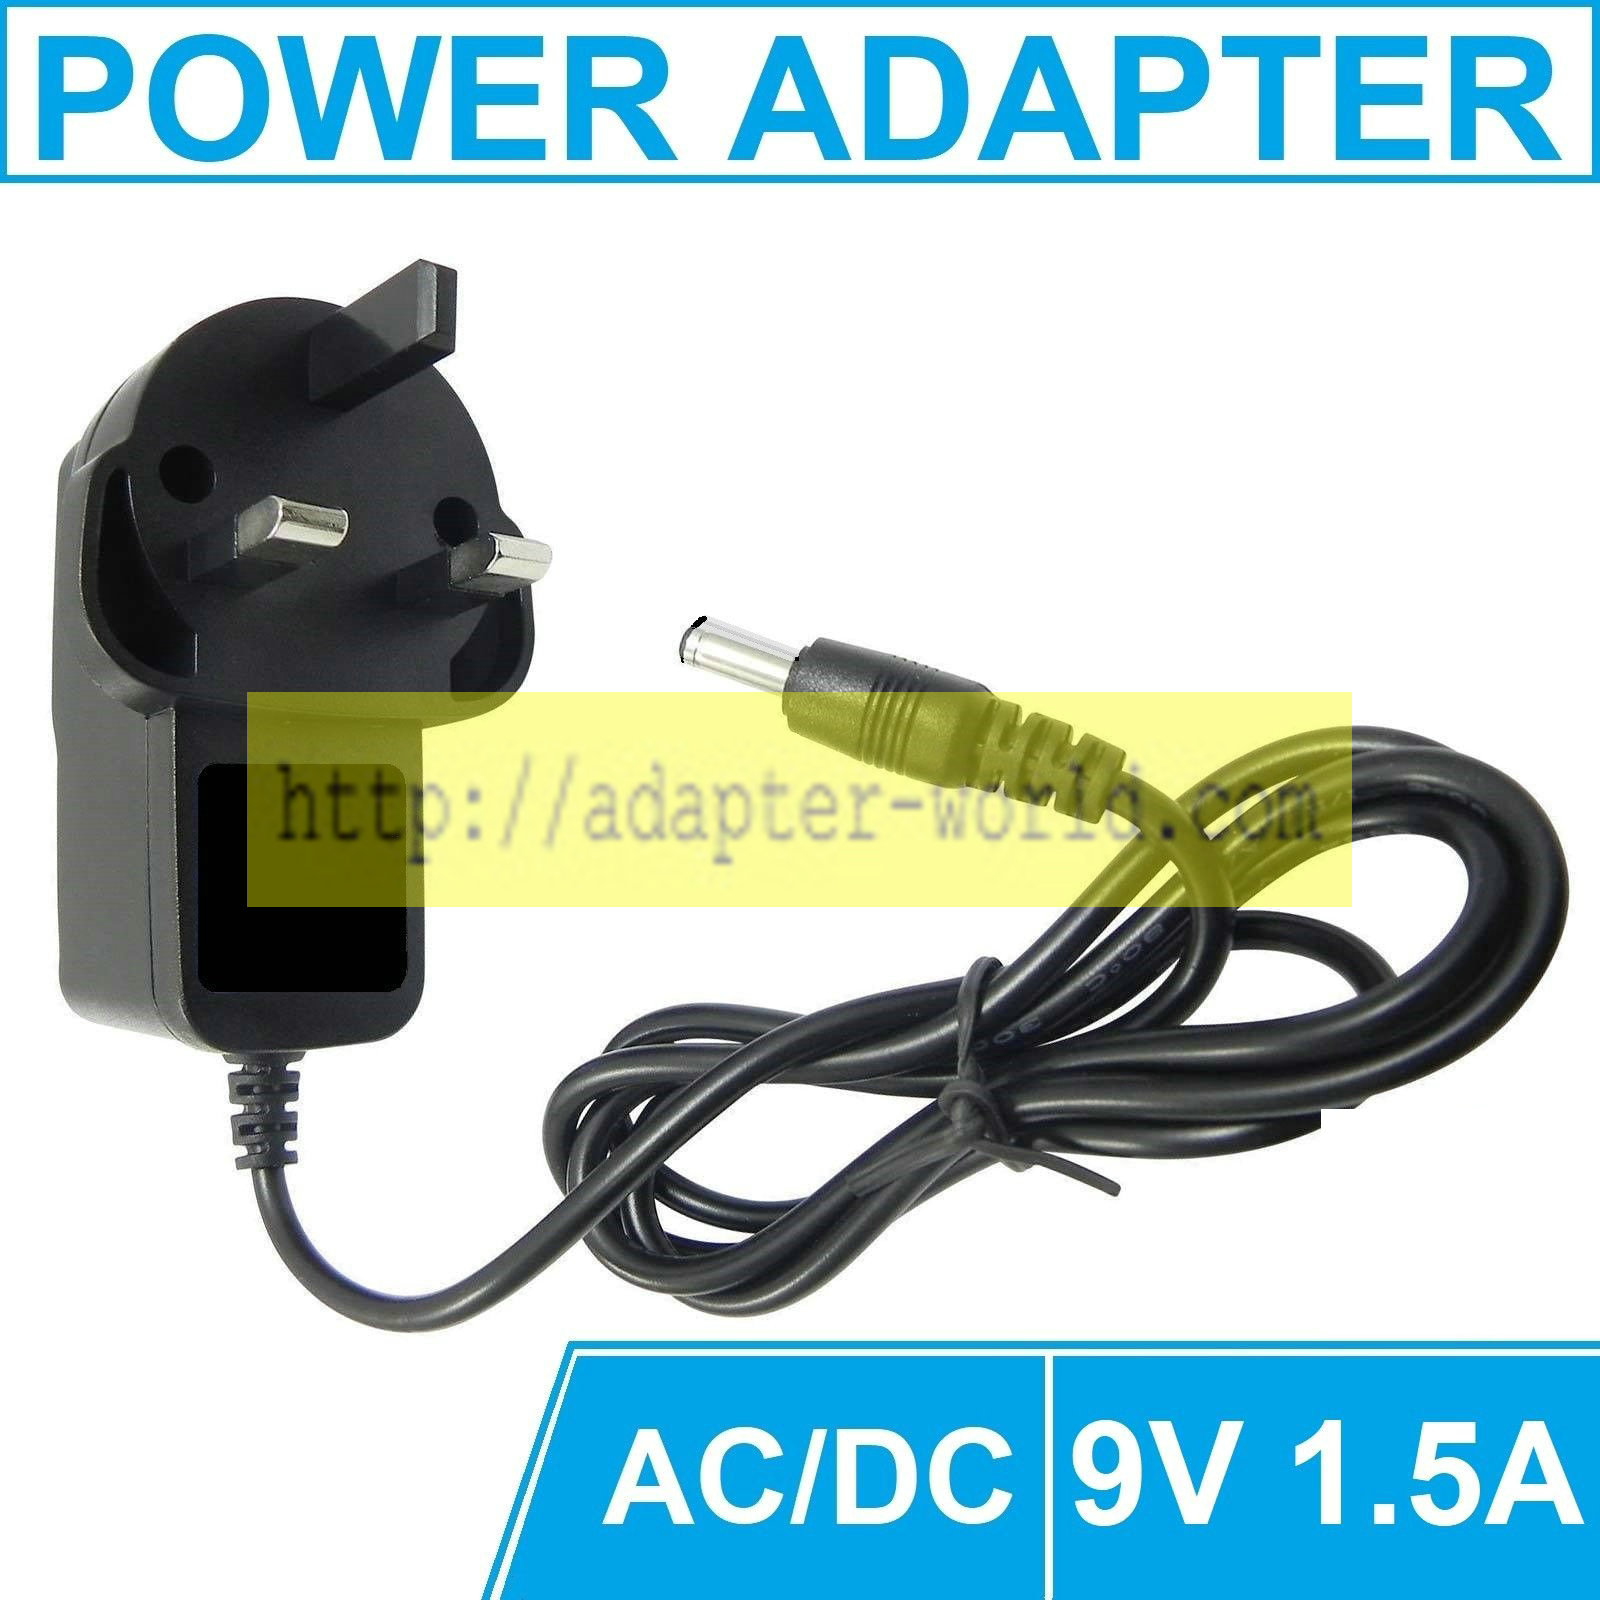 *Brand NEW*ADAPTER CHARGER PLUG CABLE LEAD 3PIN UK MAINS AC DC 9V 1.5A 1500mA POWER SUPPLY